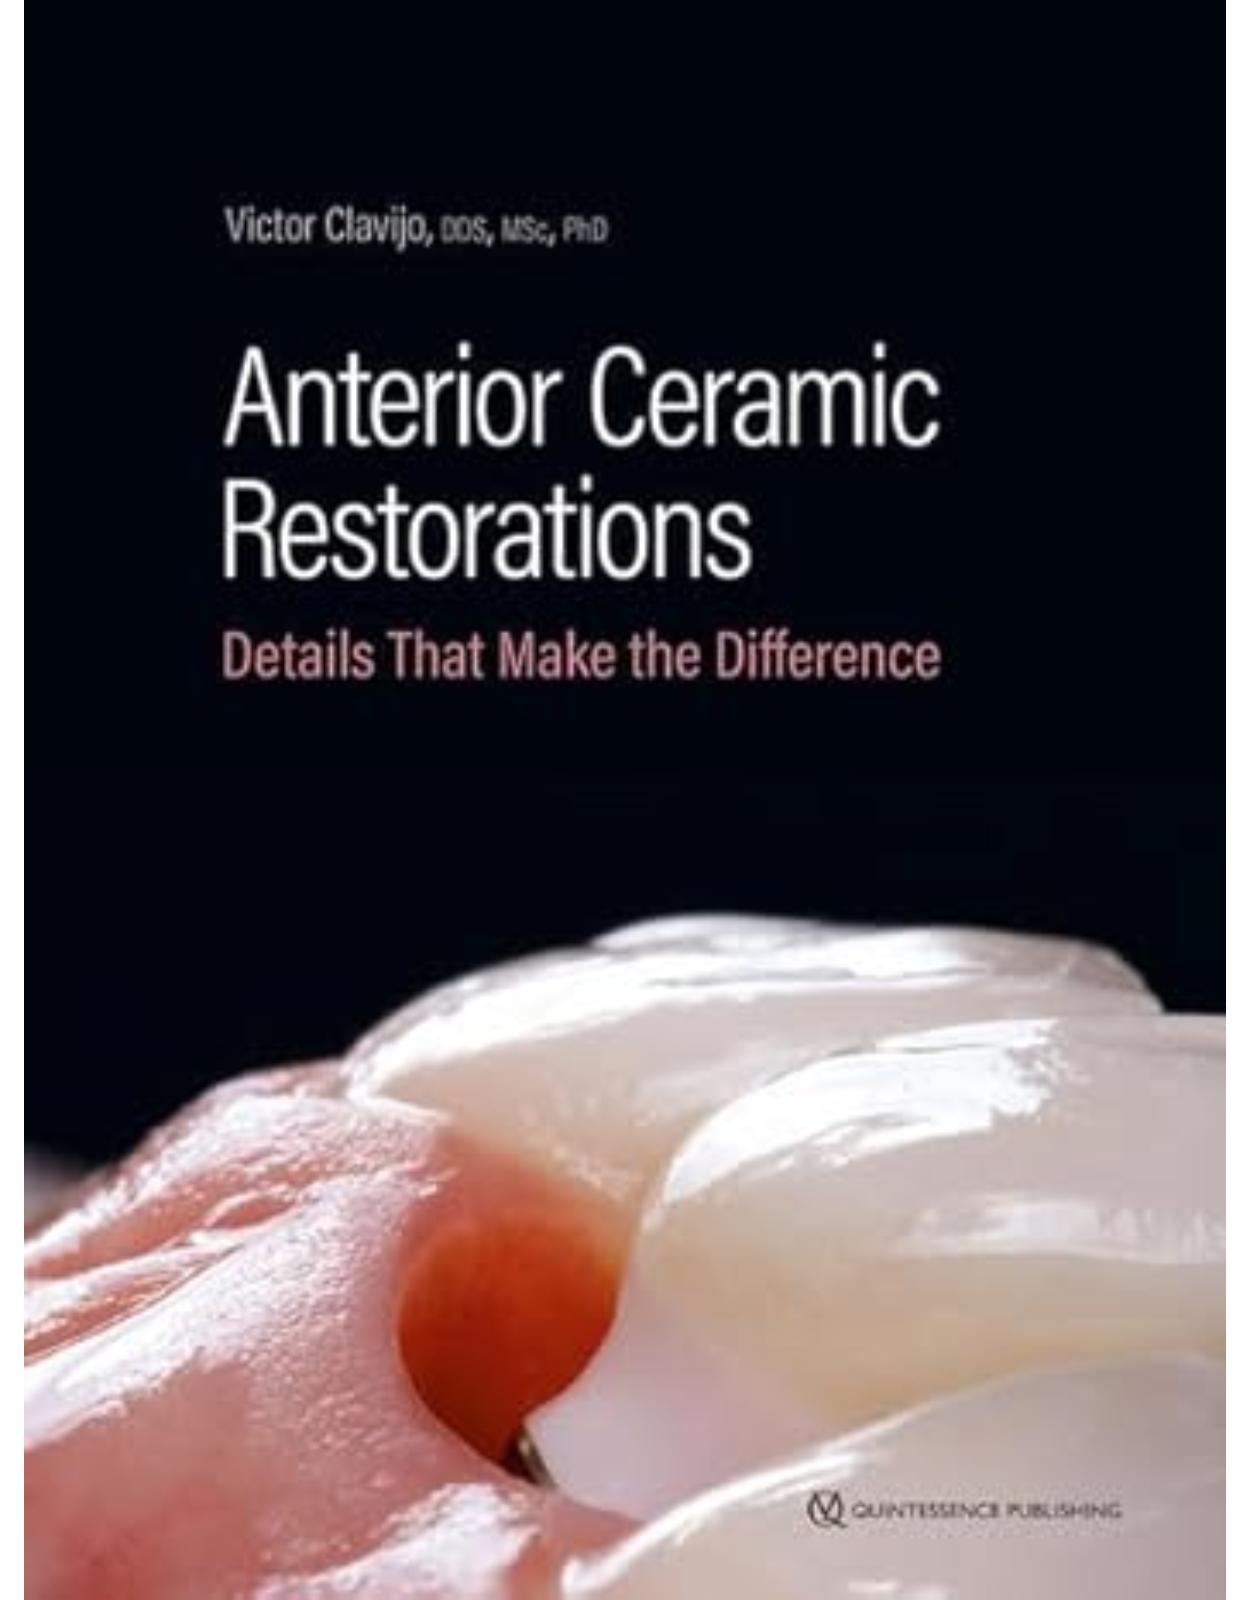 Anterior Ceramic Restorations: Details That Make the Difference